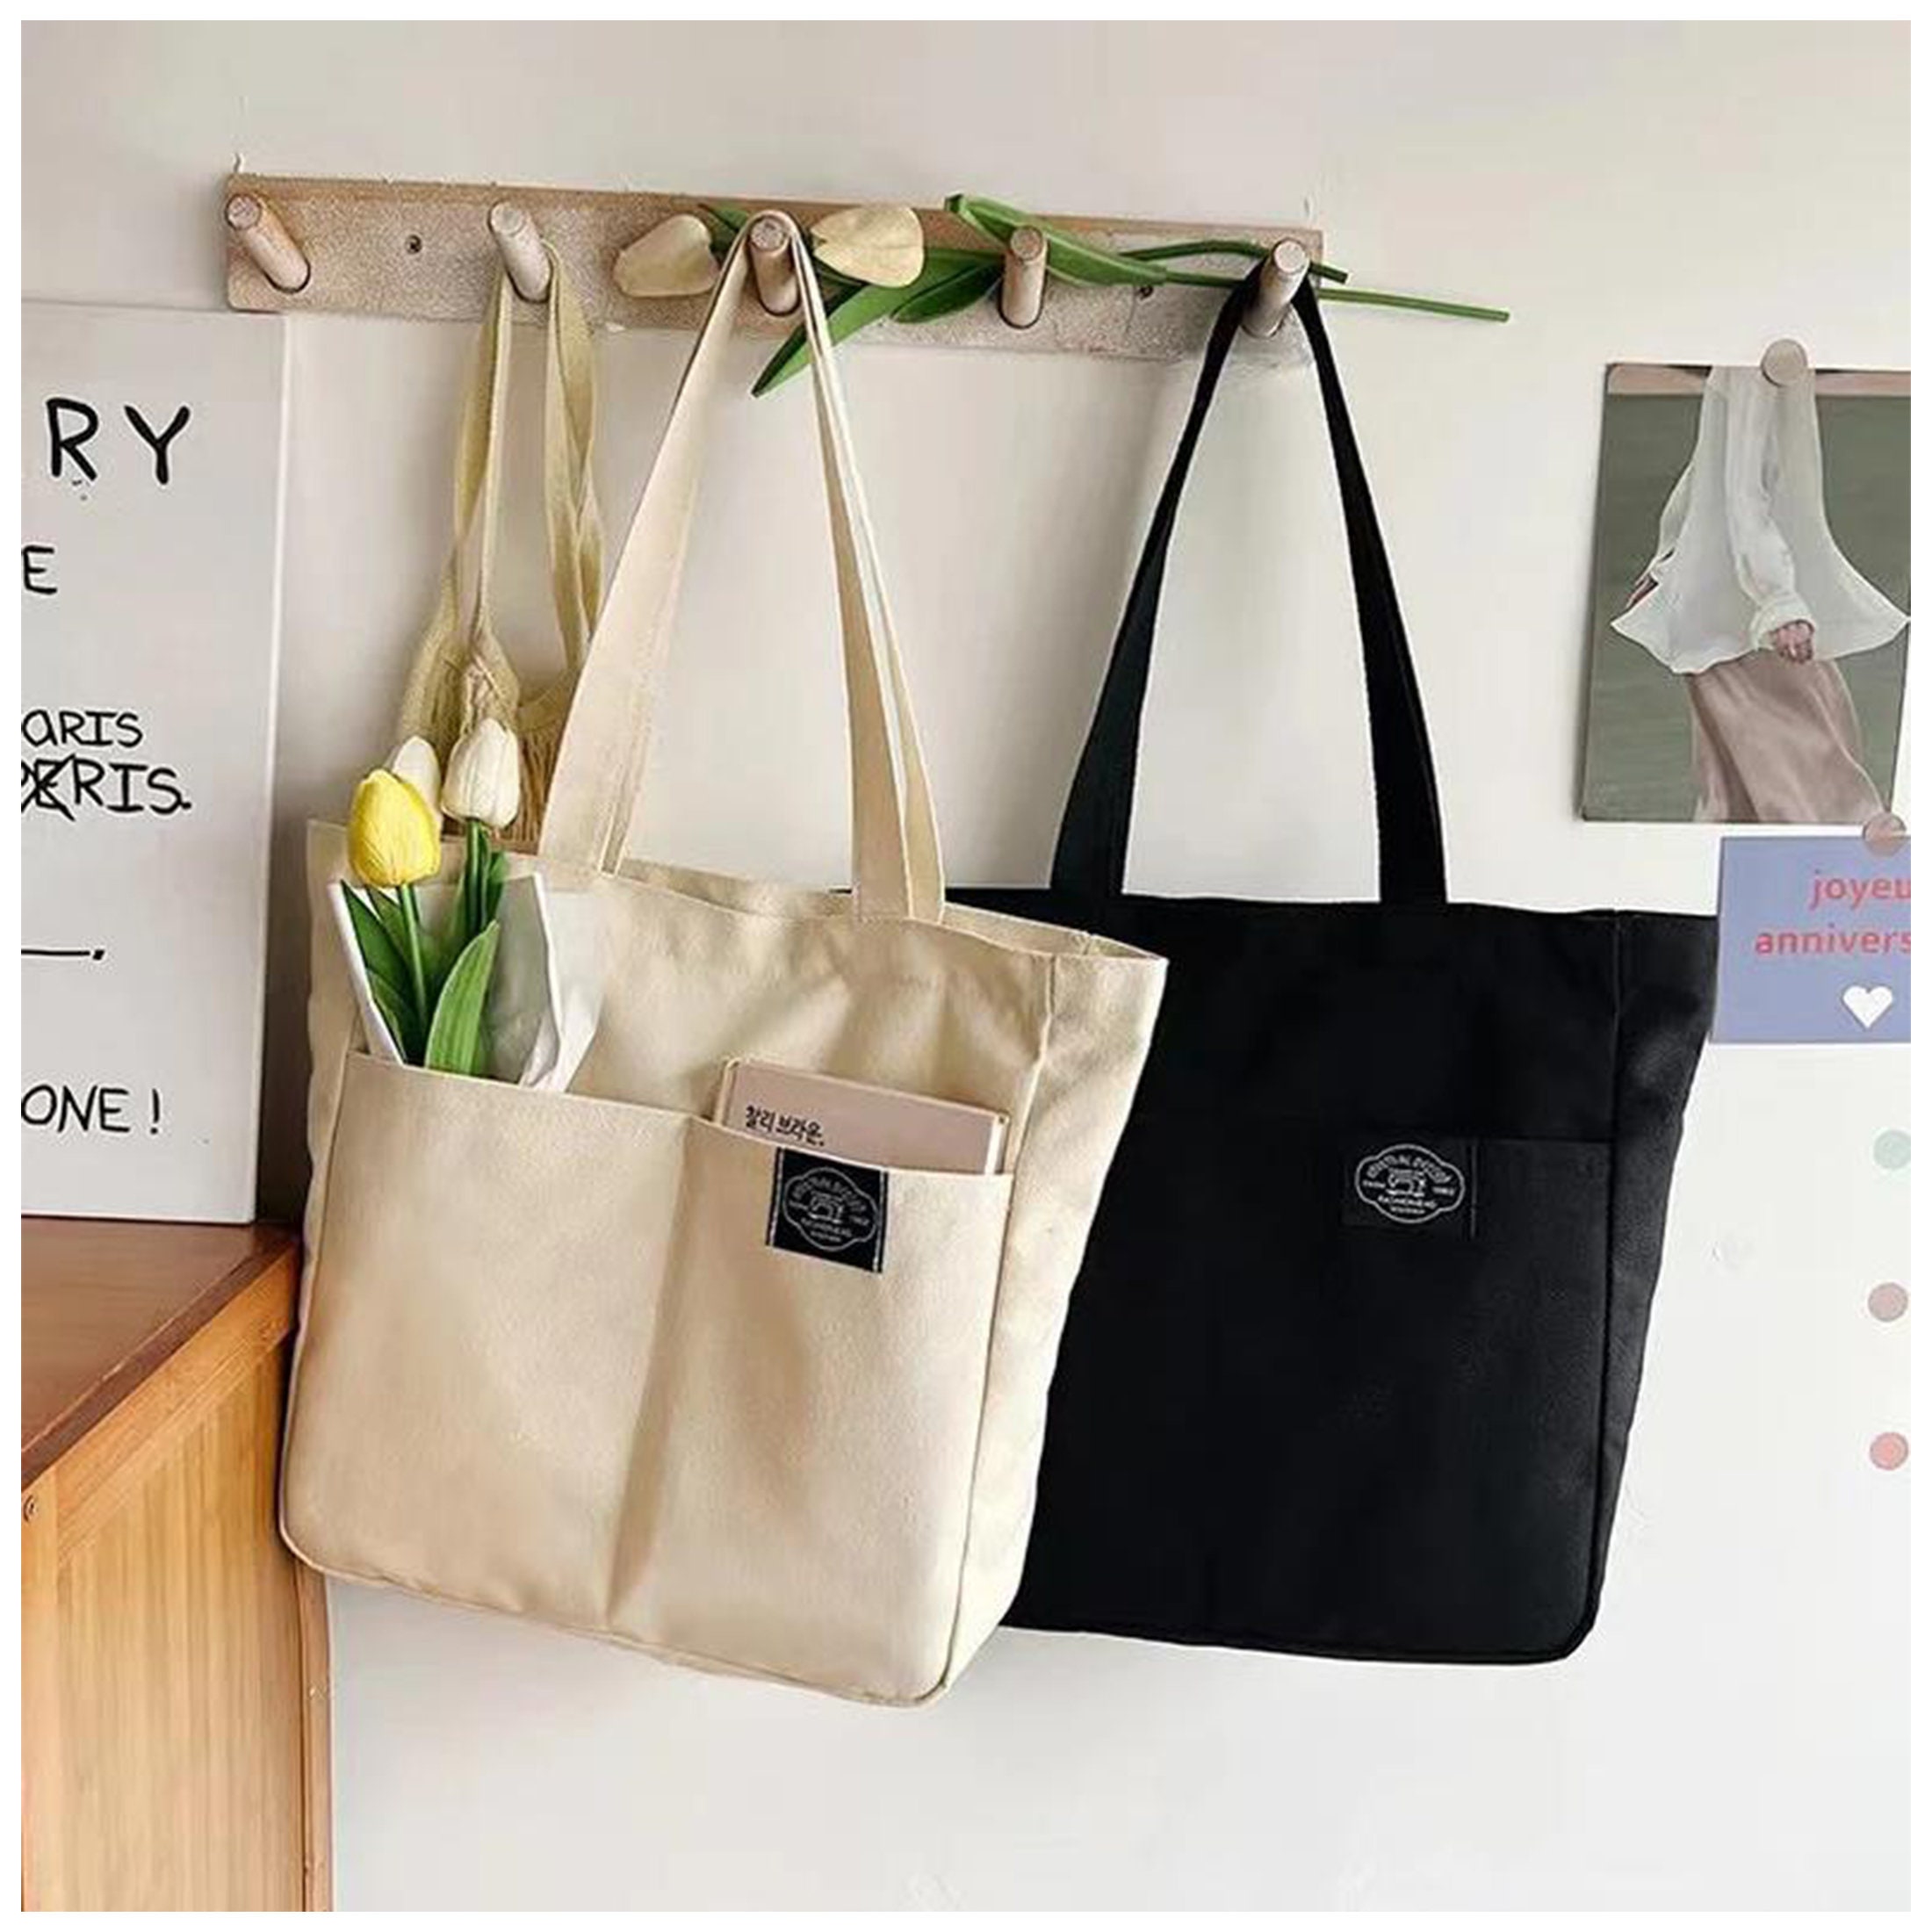 Buy Yoongi That That printed Canvas sturdy tote bag one pocket with button  closure 14  16 inches for Shopping casual outings college bags bts  Suga bag at Amazonin